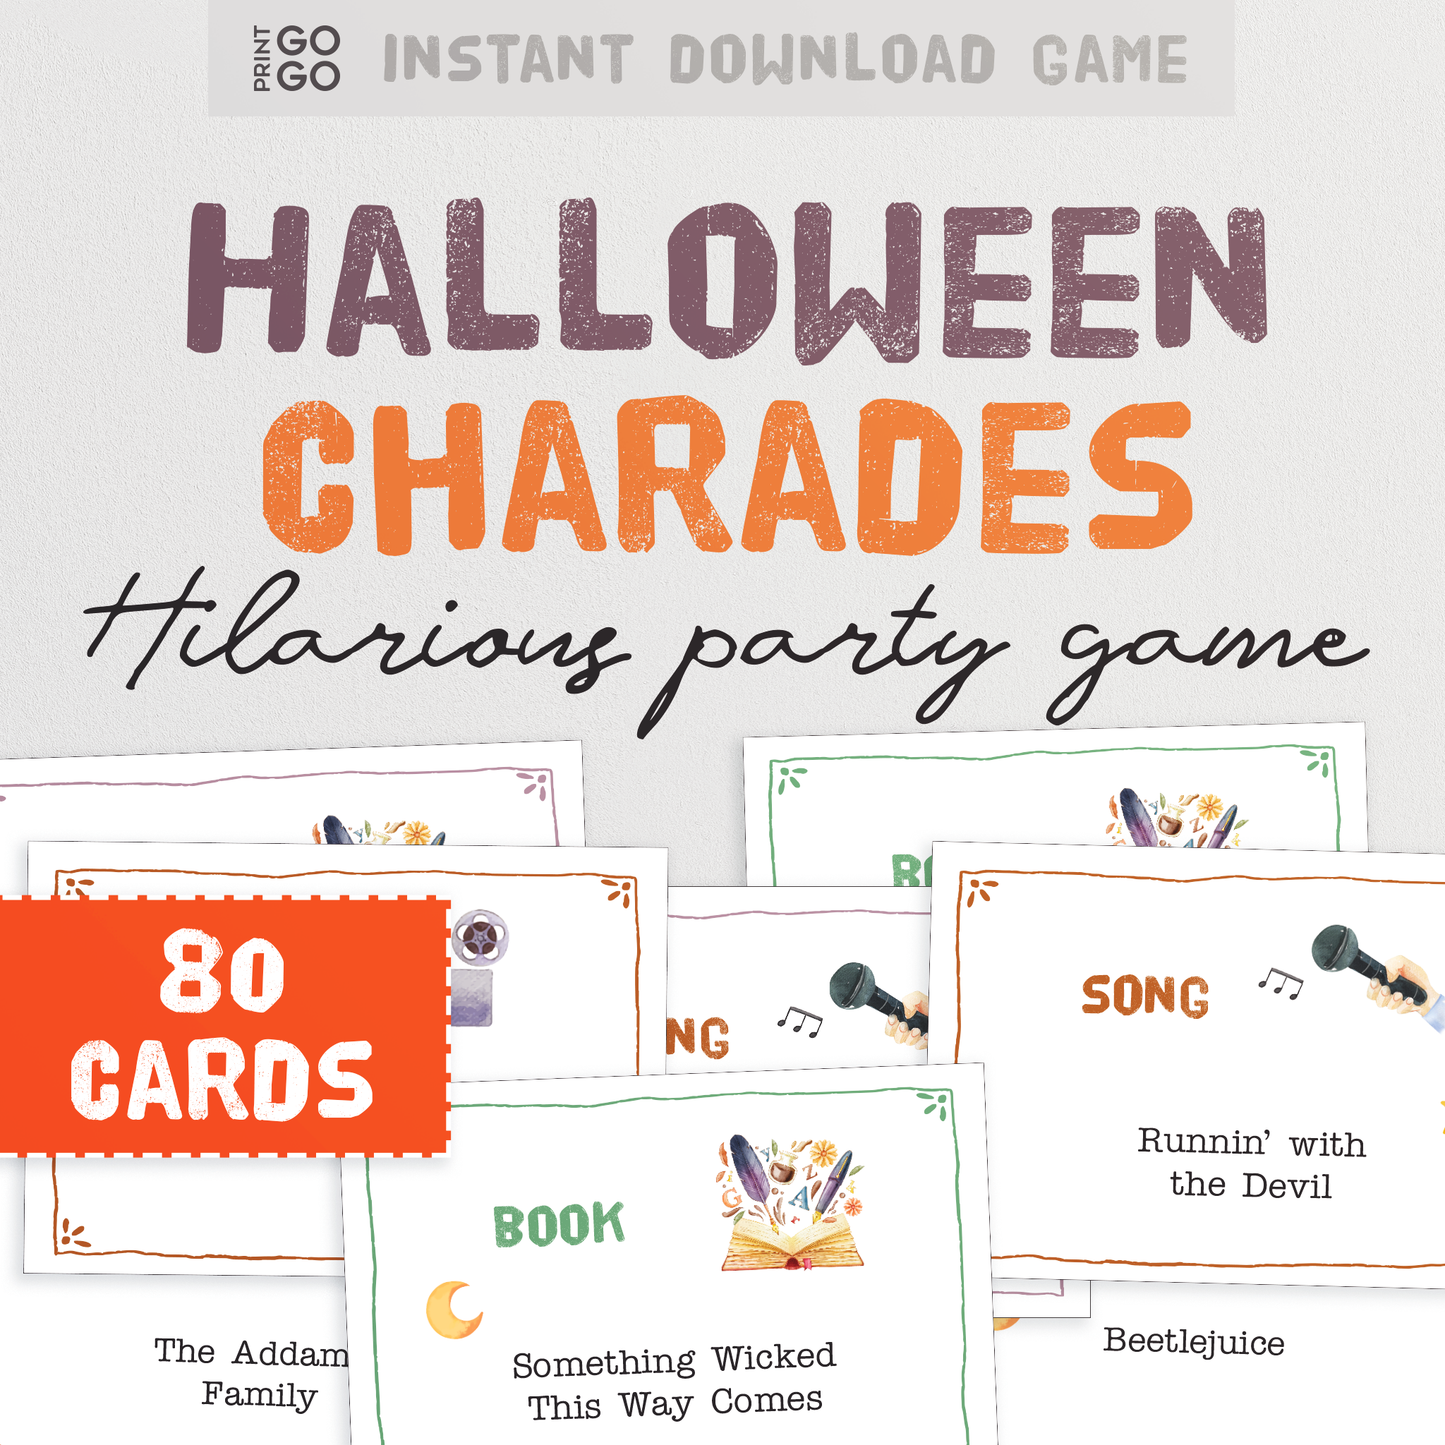 Halloween Charades Game - The Hilarious Family Party Game!